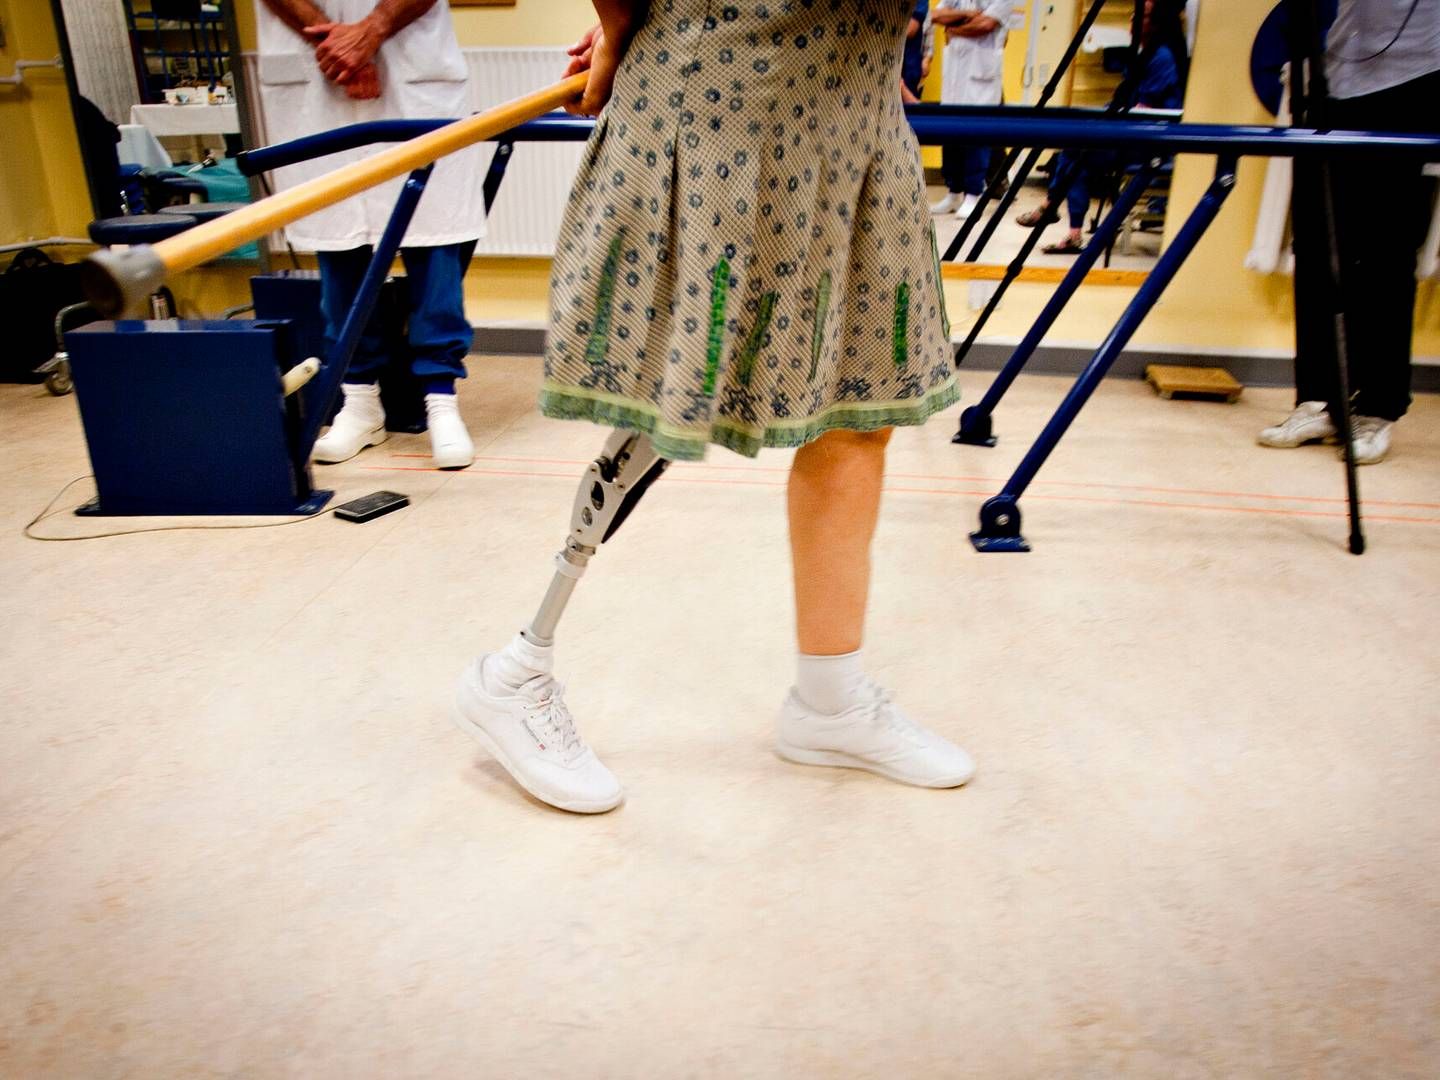 According to the company, a large new group of patients will now have access to the prosthesis. Archival image. | Foto: Cathrine Ertmann/Jyllands-Posten/Ritzau Scanpix